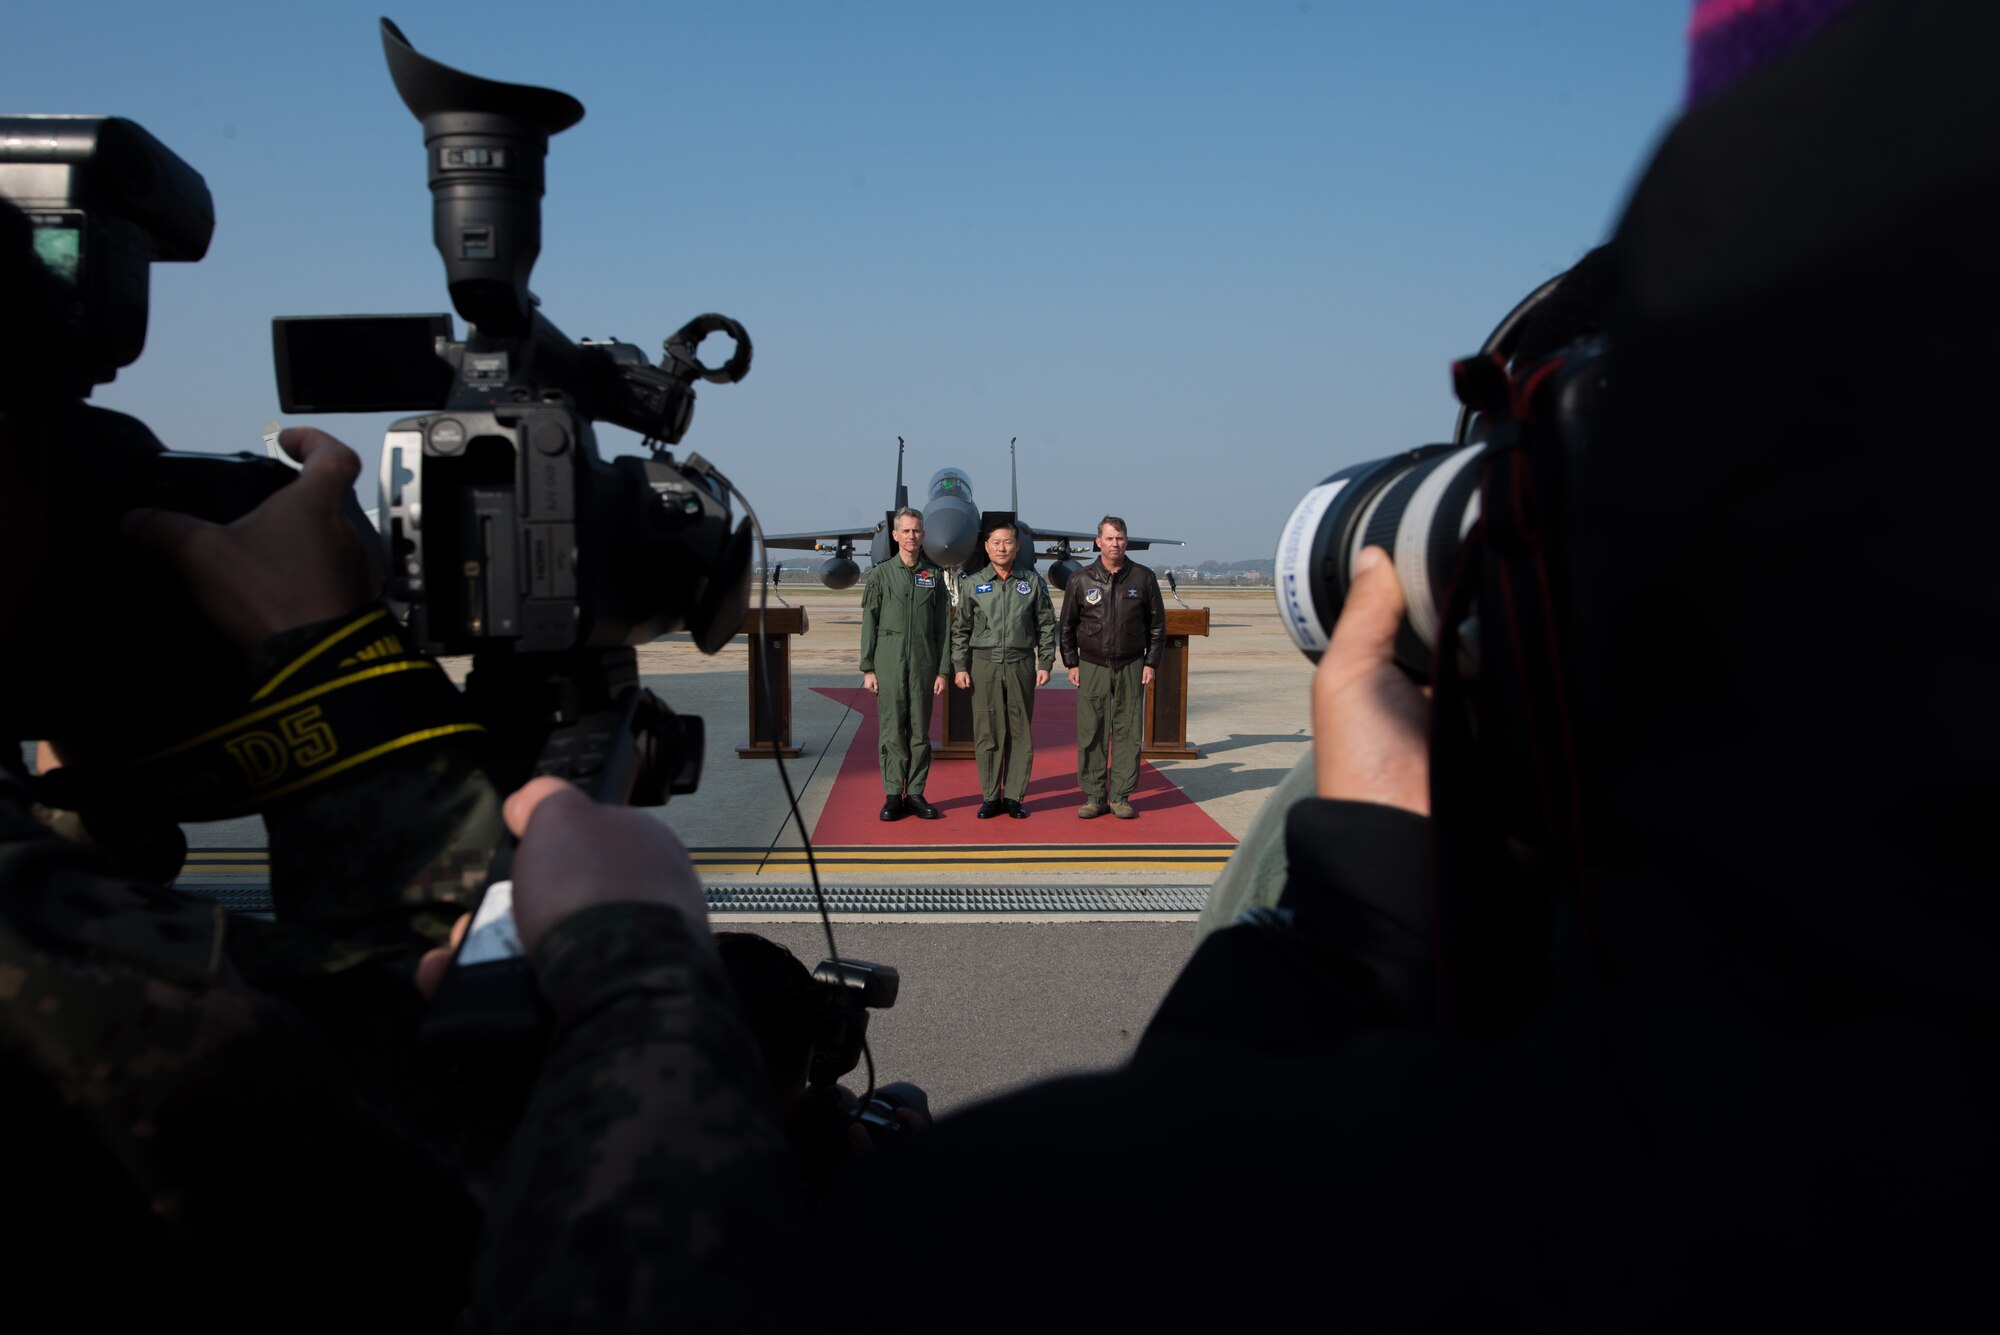 United Kingdom Air Chief Marshal Sir Stephen Hillier, Royal Air Force chief of air staff, Lt. Gen. Won, In-Choul, Republic of Korea Air Force Operations Command commander, and Lt. Gen Thomas W. Bergeson, 7th Air Force commander, gather for a group photo during a media event for  Invincible Shield, an interoperability exchange, at Osan Air Base, ROK, Nov. 8, 2016. The RAF, U.S. and ROK air forces participated in Invincible Shield, which marked the first time the RAF has fielded aircraft on the Korean Peninsula since the Korean War. (U.S. Air Force photo by Senior Airman Dillian Bamman)